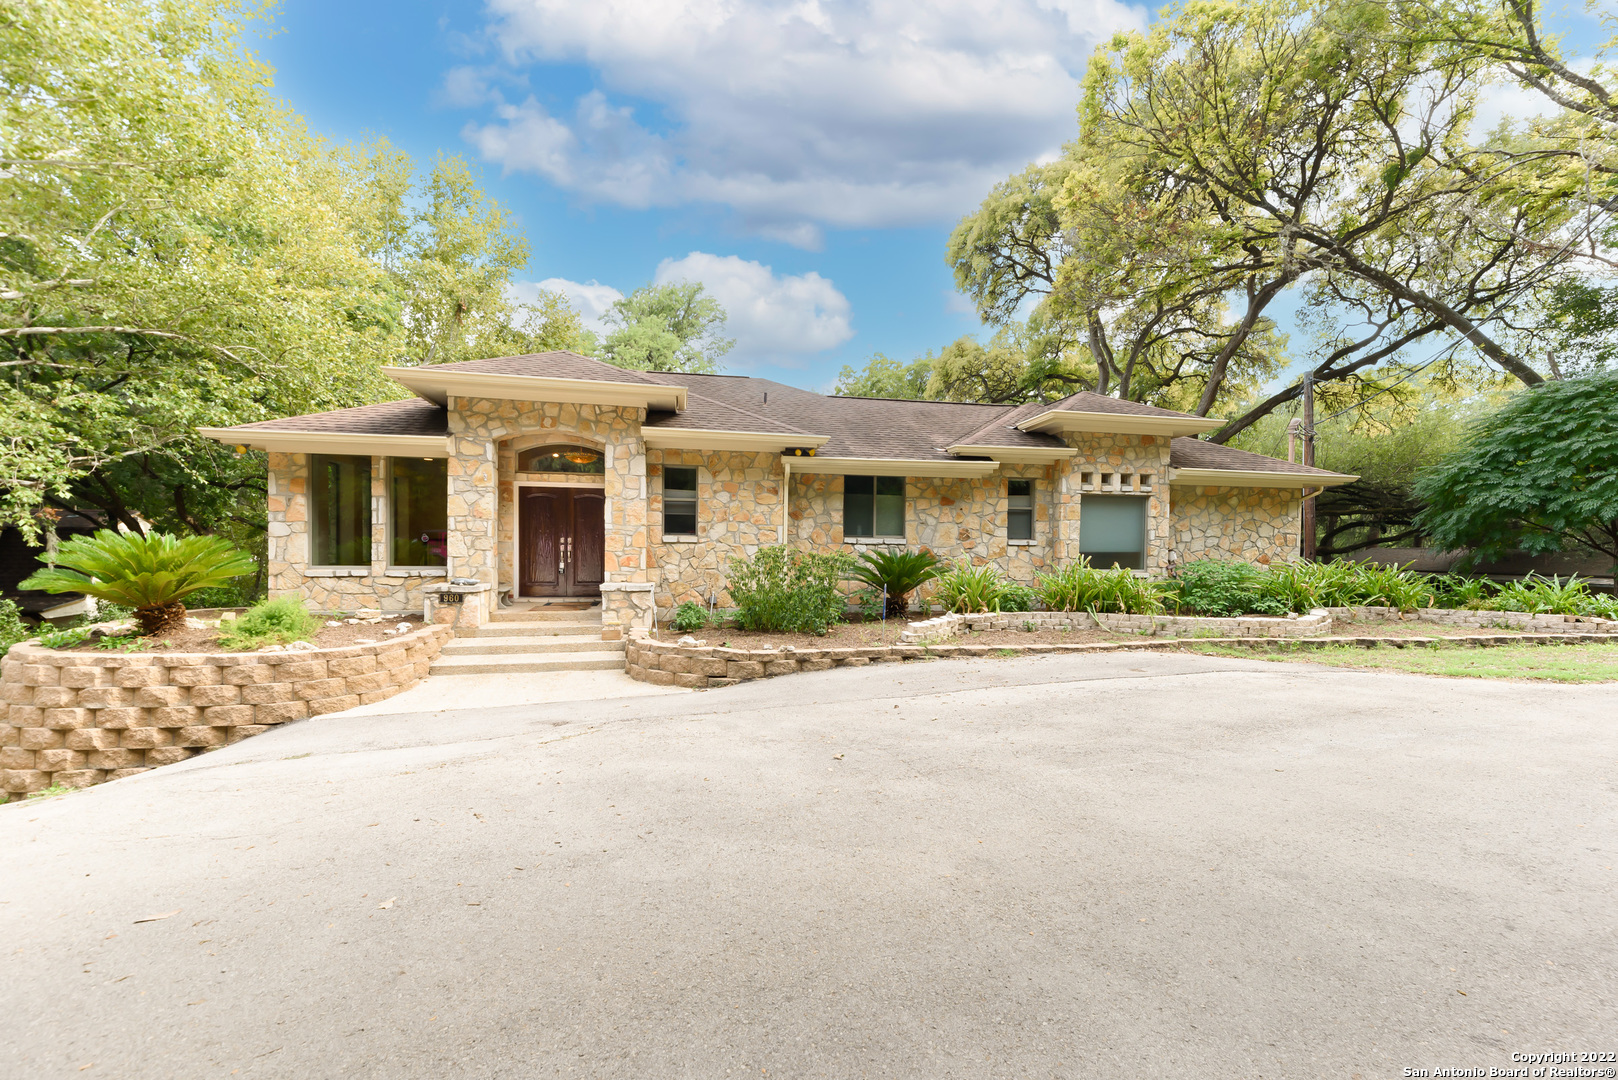 Don't miss this luxury custom built home that has been meticulously maintained and perched high to enjoy the Best Views of the Guadalupe River. This one in a million home has over 4800 sq ft living space, 170 ft river front, multiple tiered decks/seating areas, 4 bedrooms, 4.5 bathrooms, to use as your Primary Residence or Vacation Rental income potential. This exquisite residence embodies extreme quality. The home boast beautiful tile floors and vaulted ceiling. The open kitchen keeps the entertaining easy with a built-in Sub Zero refrigerator and the full wet bar in the dinning room. This impeccable home continues with details that will satisfy everyone's request. Two large living rooms for great gatherings and space. The second lot hosts bungalows set up to increase the opportunity for short term rental potential. This is a home that you must see to appreciate.